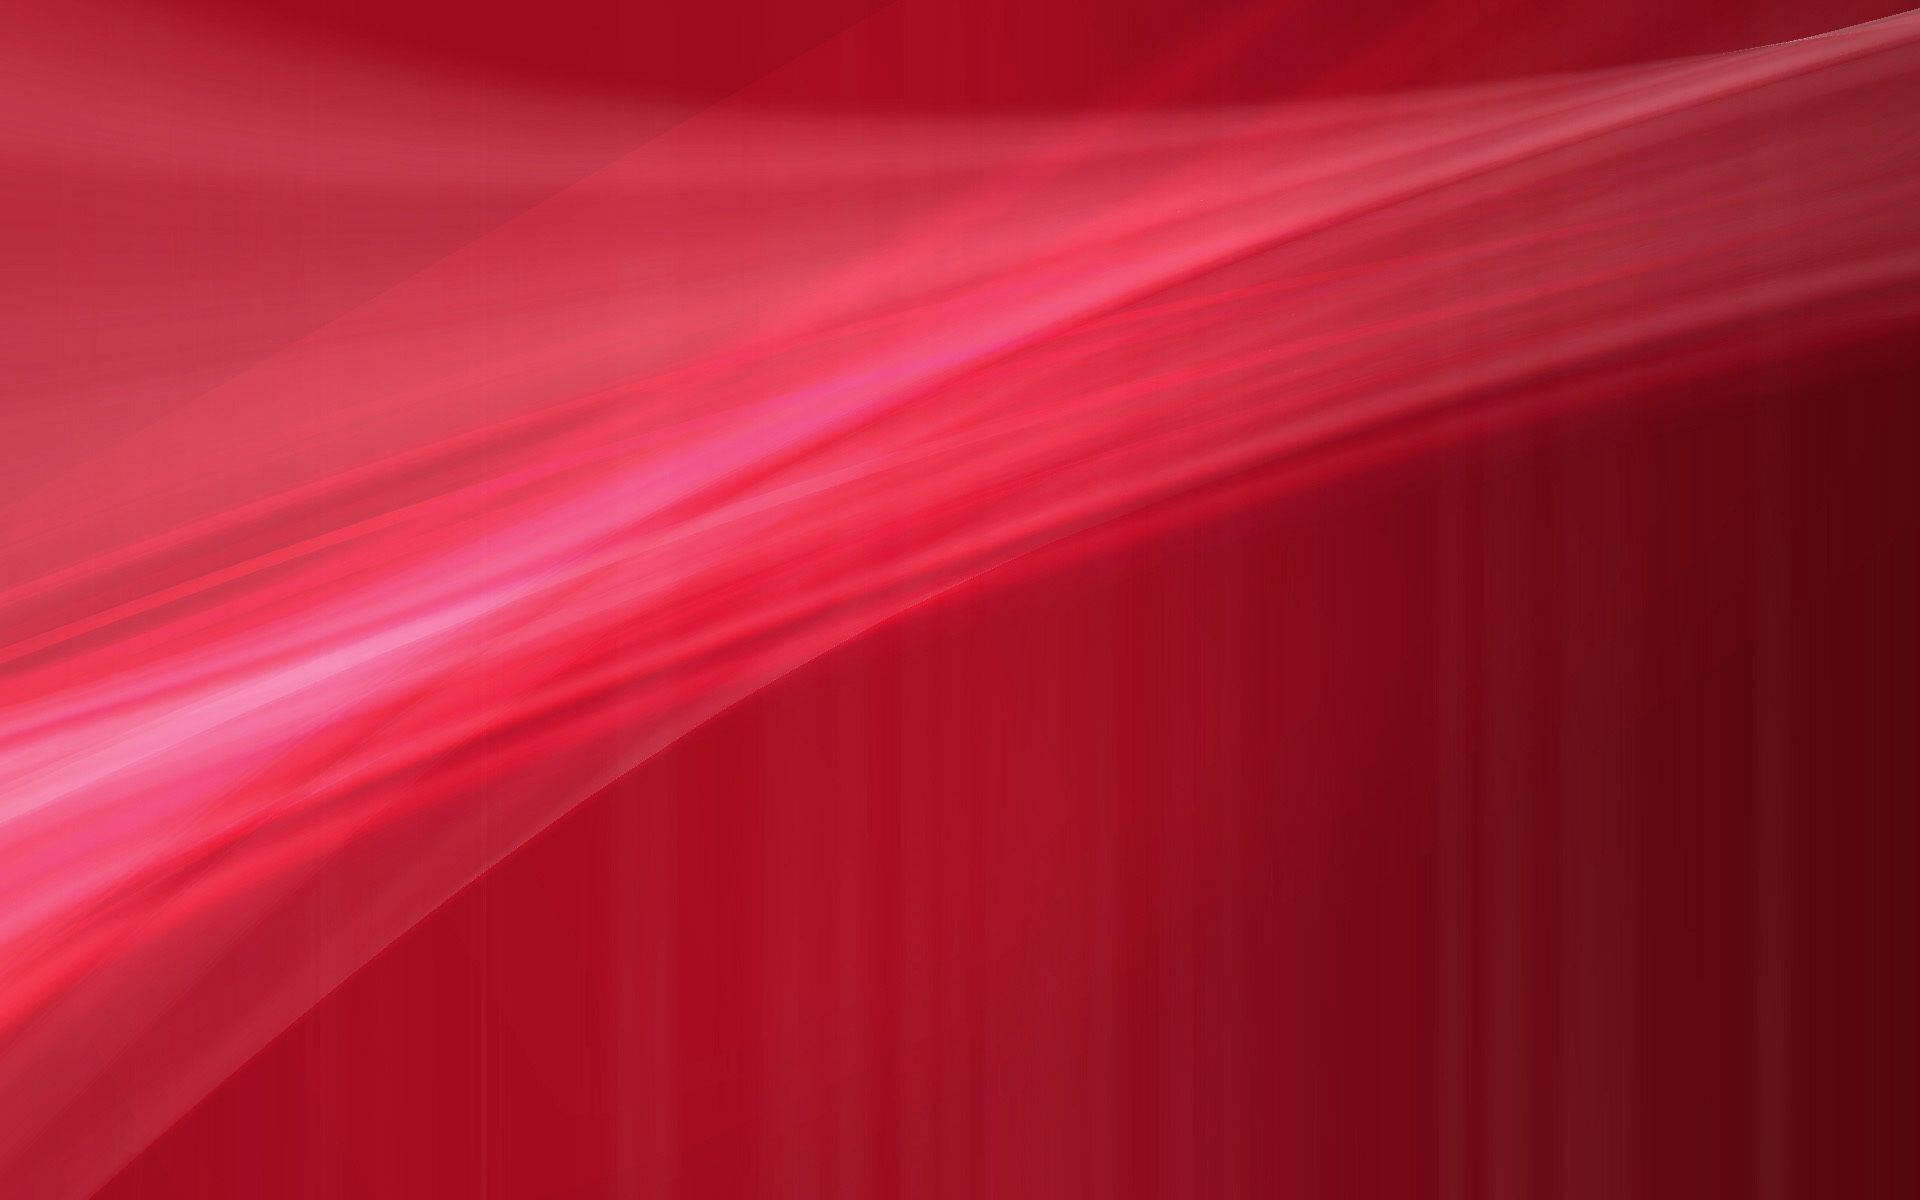 Red Background Images  Free Download on Freepik